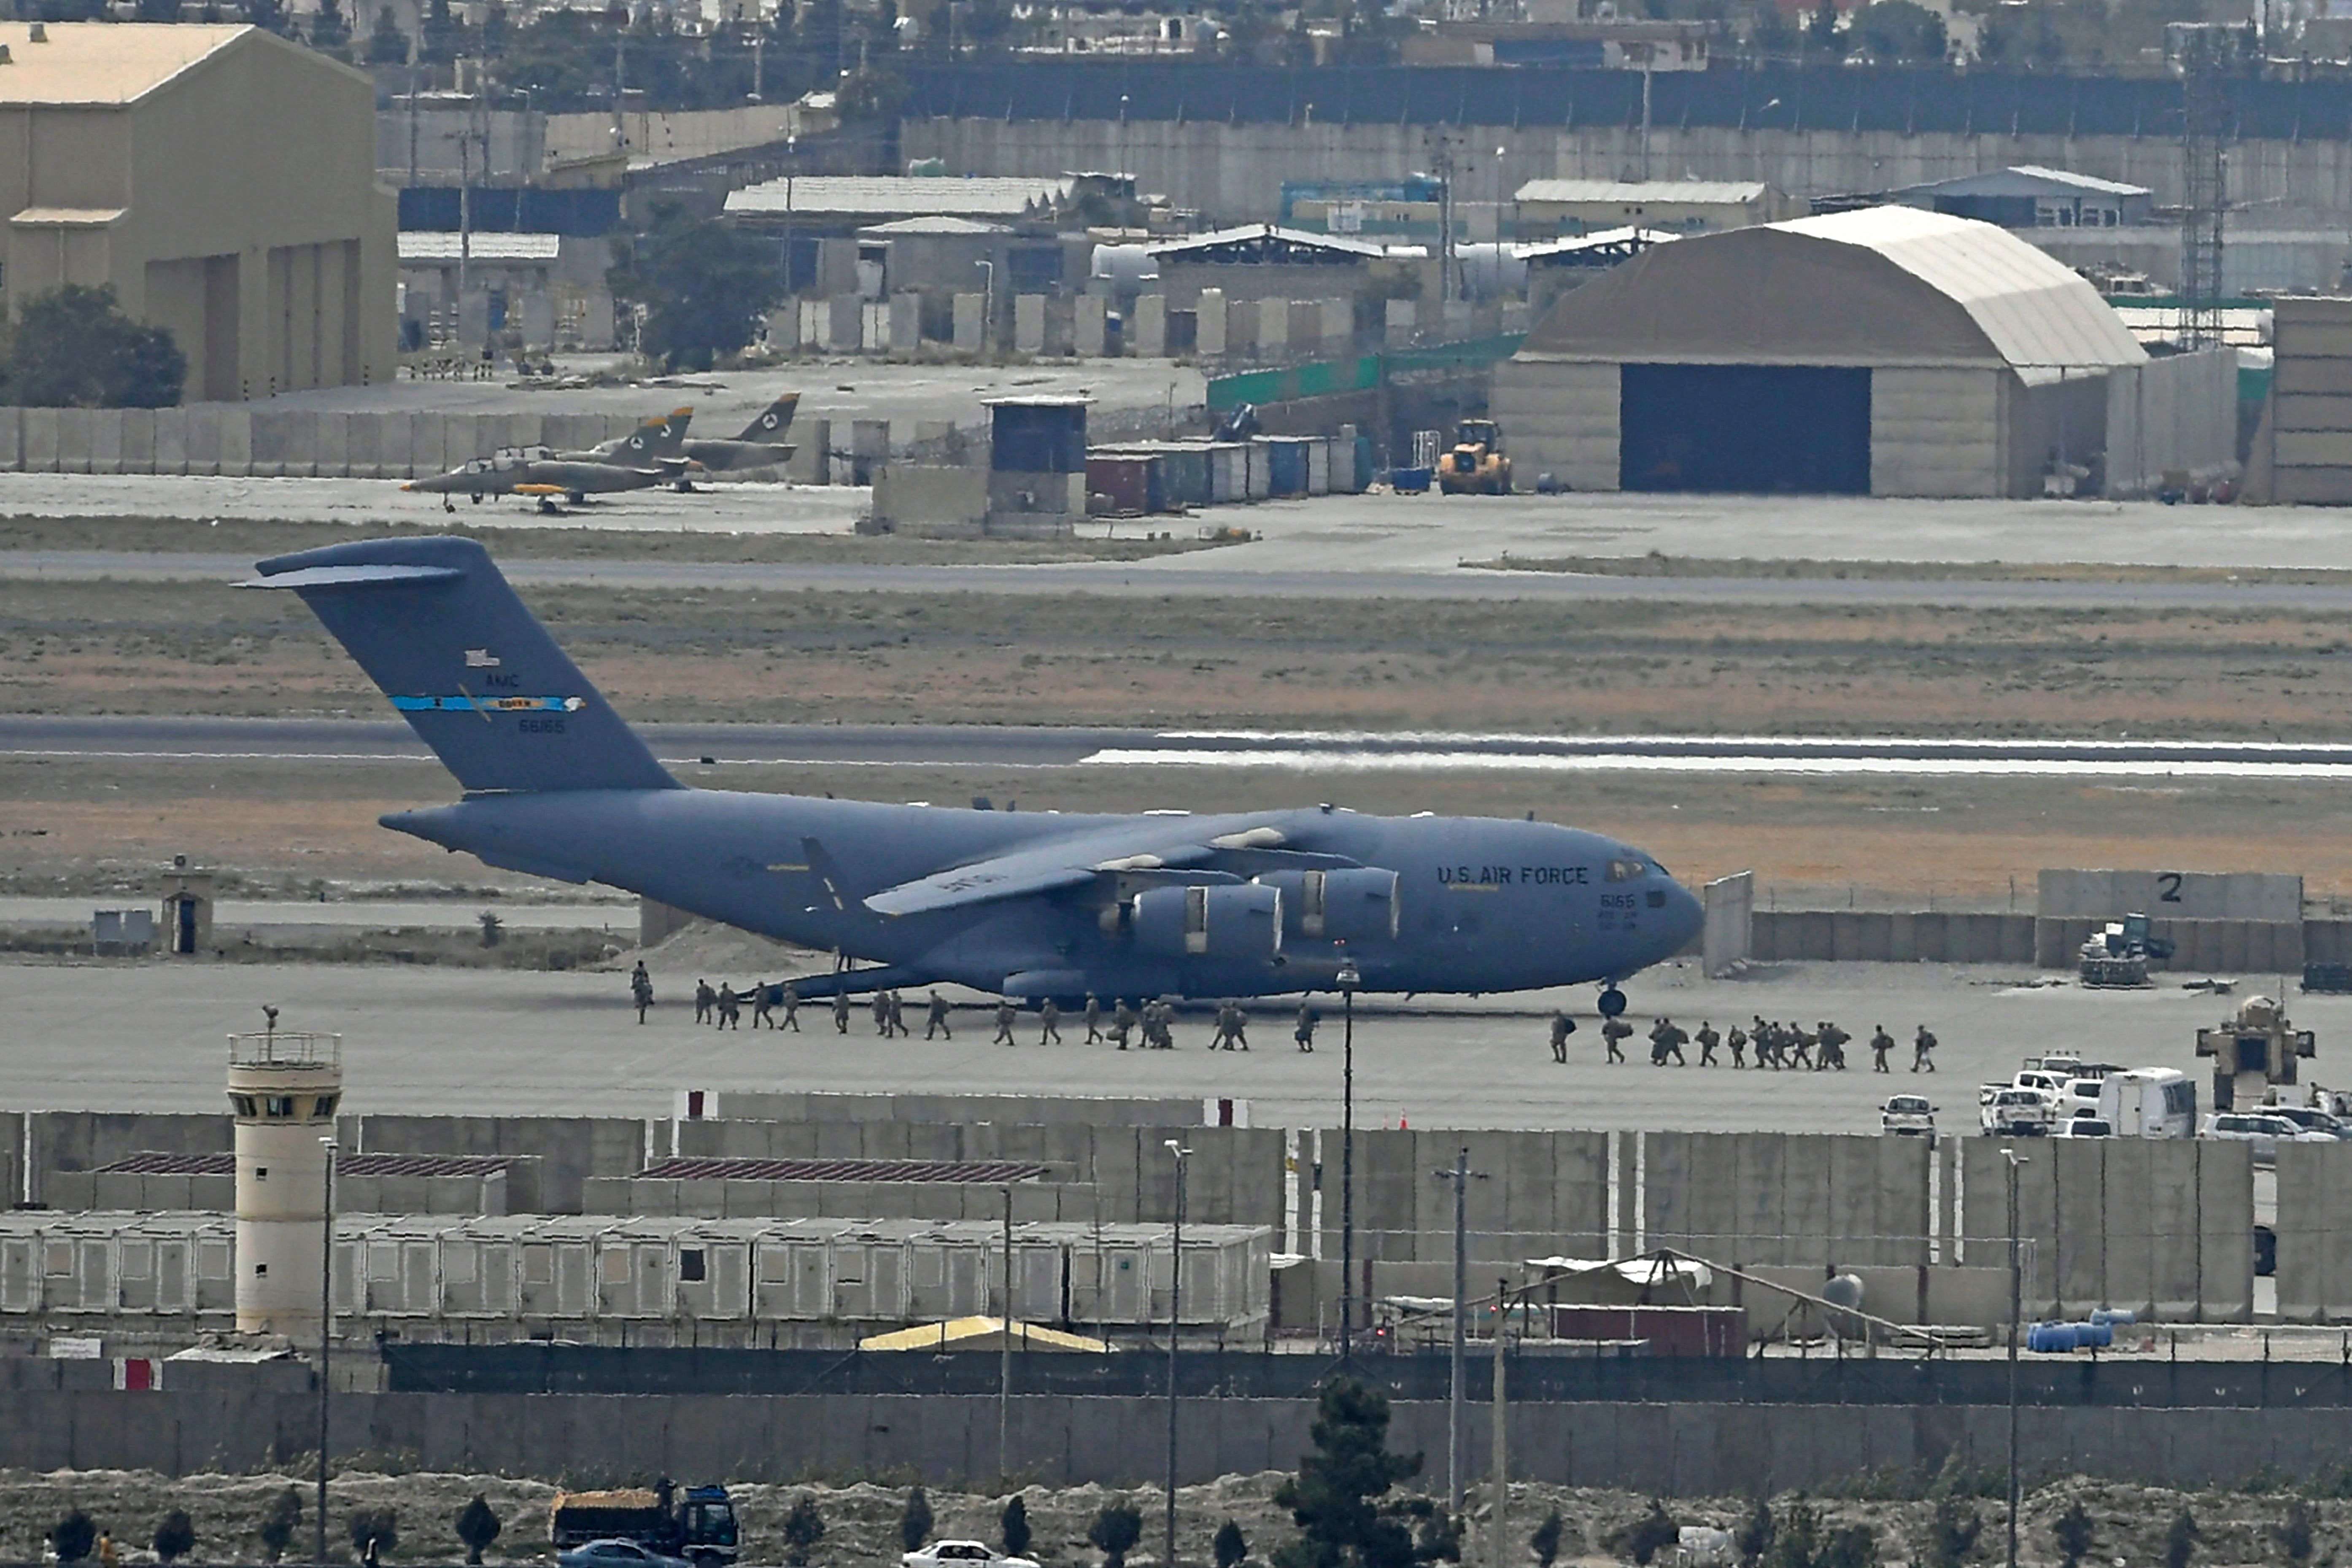 US soldiers board a US Air Force aircraft at the airport in Kabul on August 30, 2021.